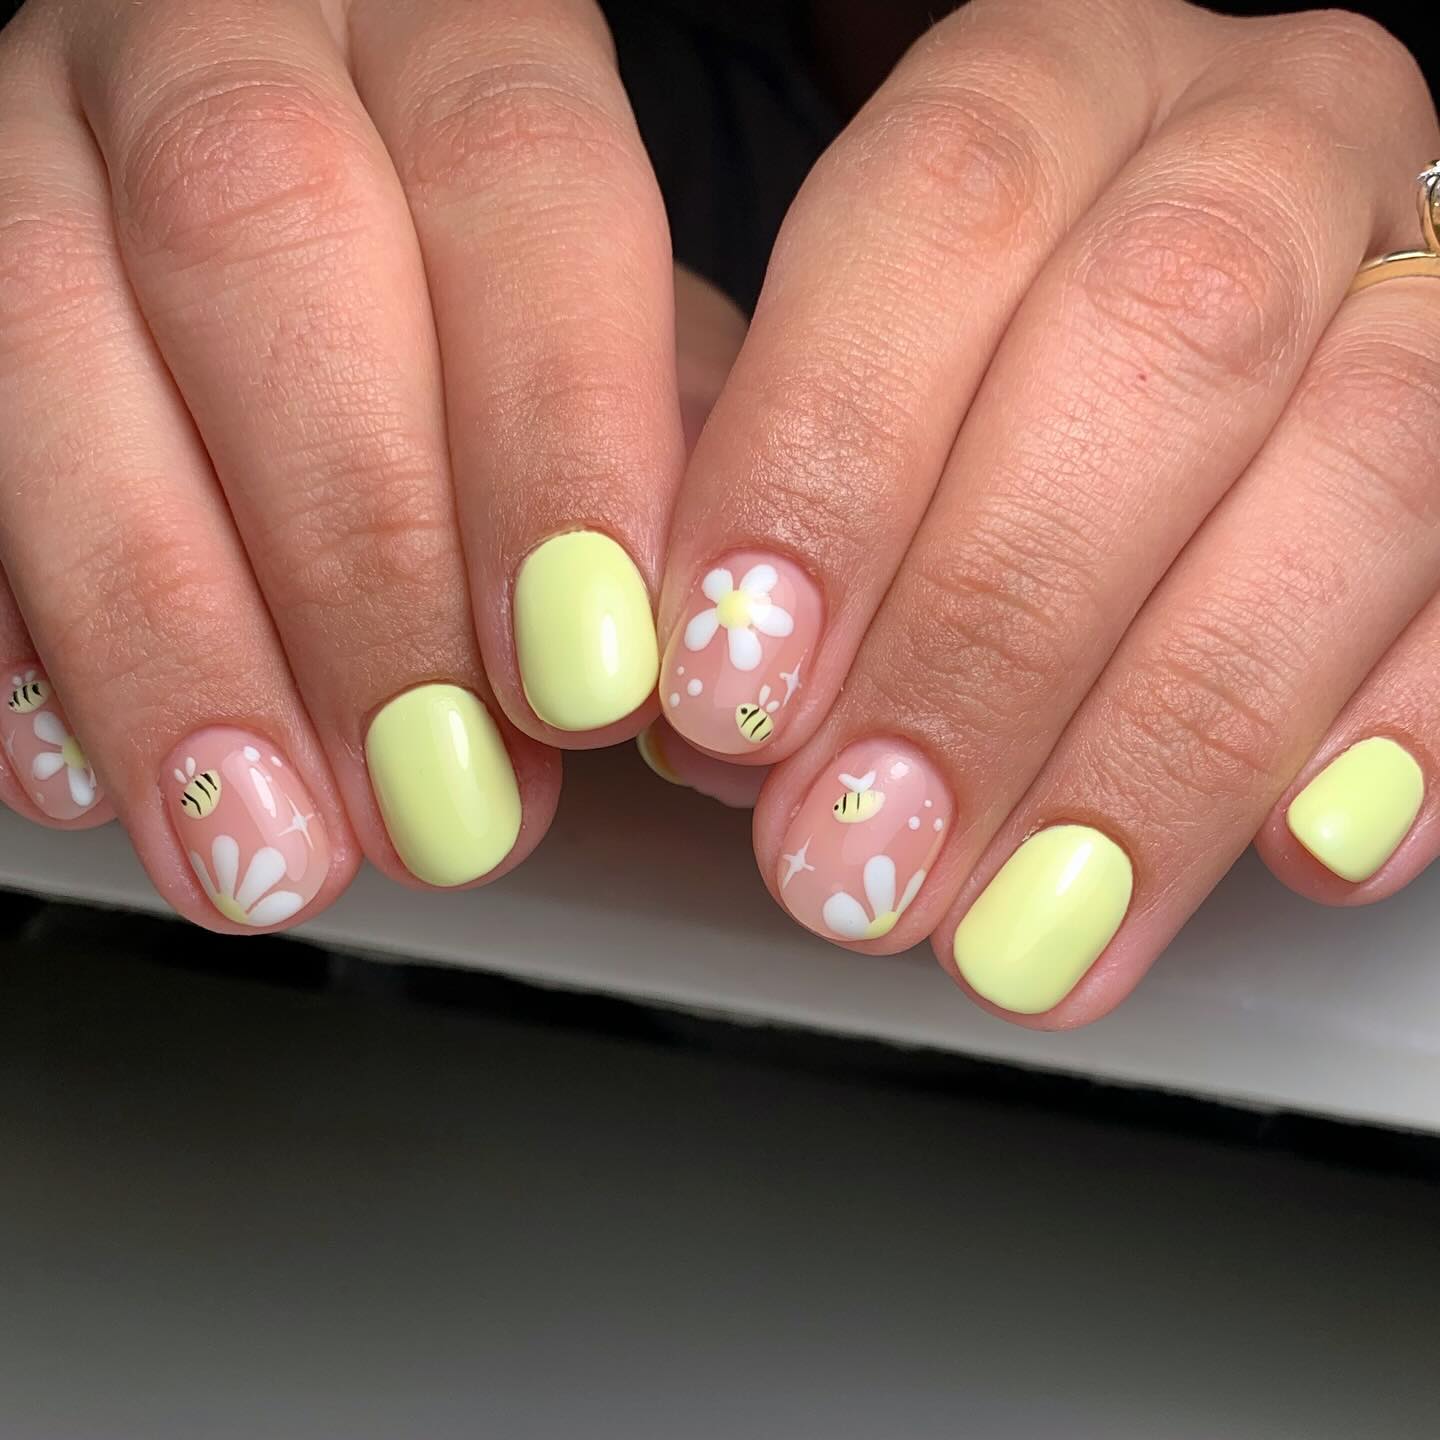 100 Of The Best Spring Inspired Nail Designs images 20